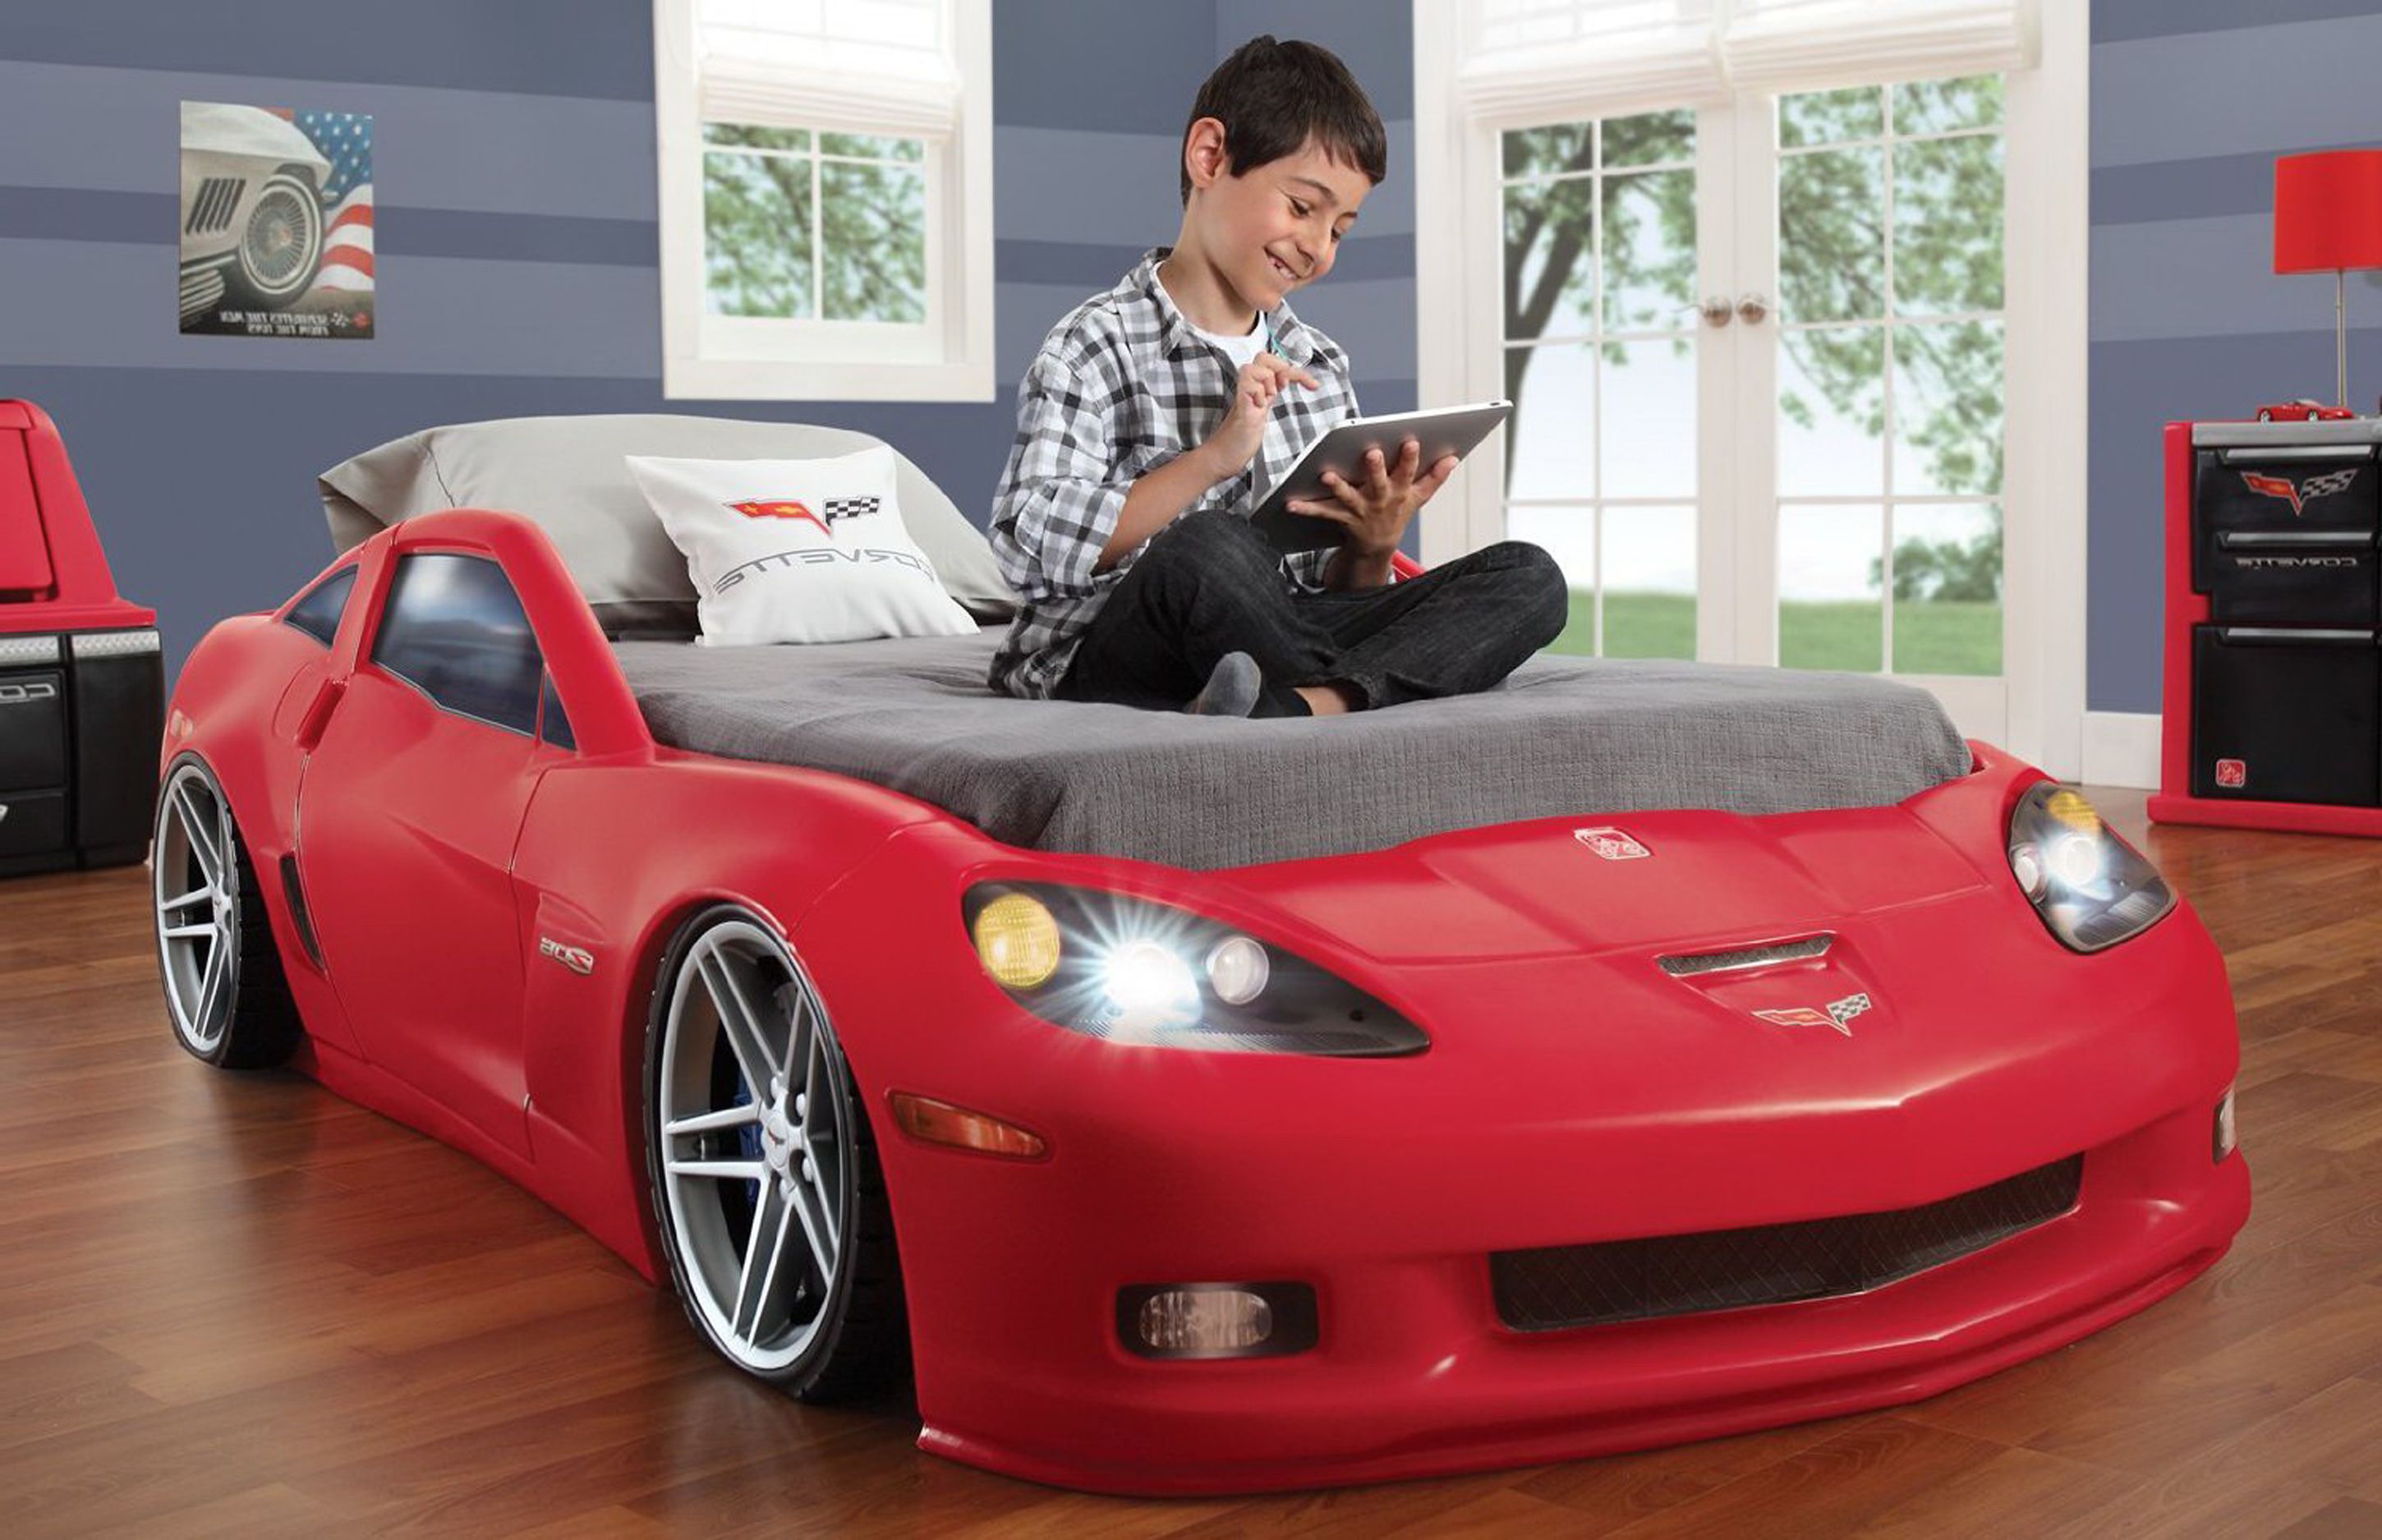 Kids Bedroom Fancy Boys Bedroom Decoration Idea With Red Car Themed Bed Frame With Gray Bed Sheet White Pillow And Brown Hardwood Floor Tile Impressive Boys Bedroom Decoration Ideas (View 4 of 28)